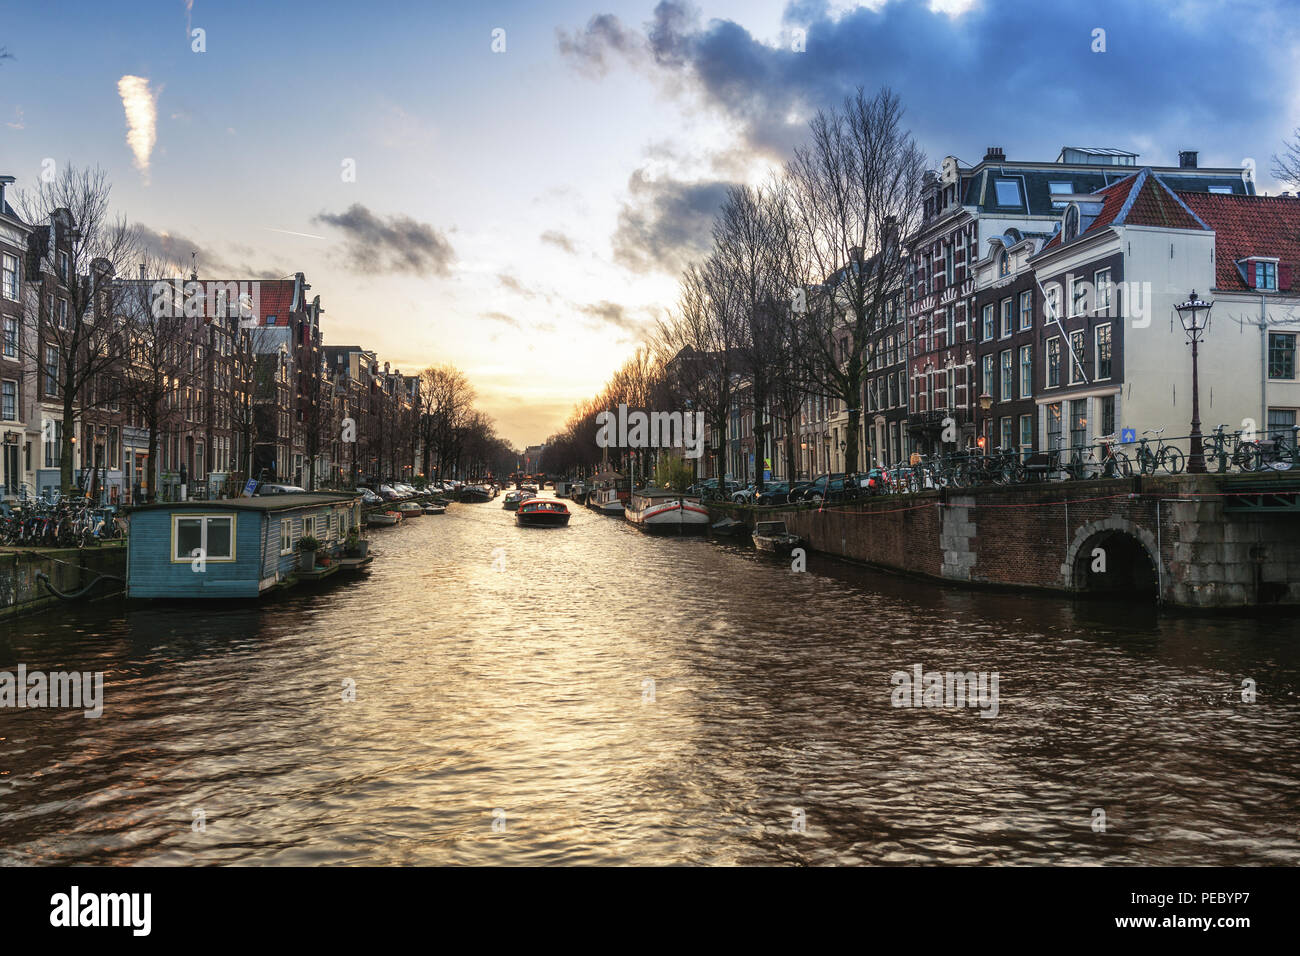 Amsterdam, The Netherlands, December 26, 2017: Canal boats in the Herengracht in the old center of Amsterdam Stock Photo